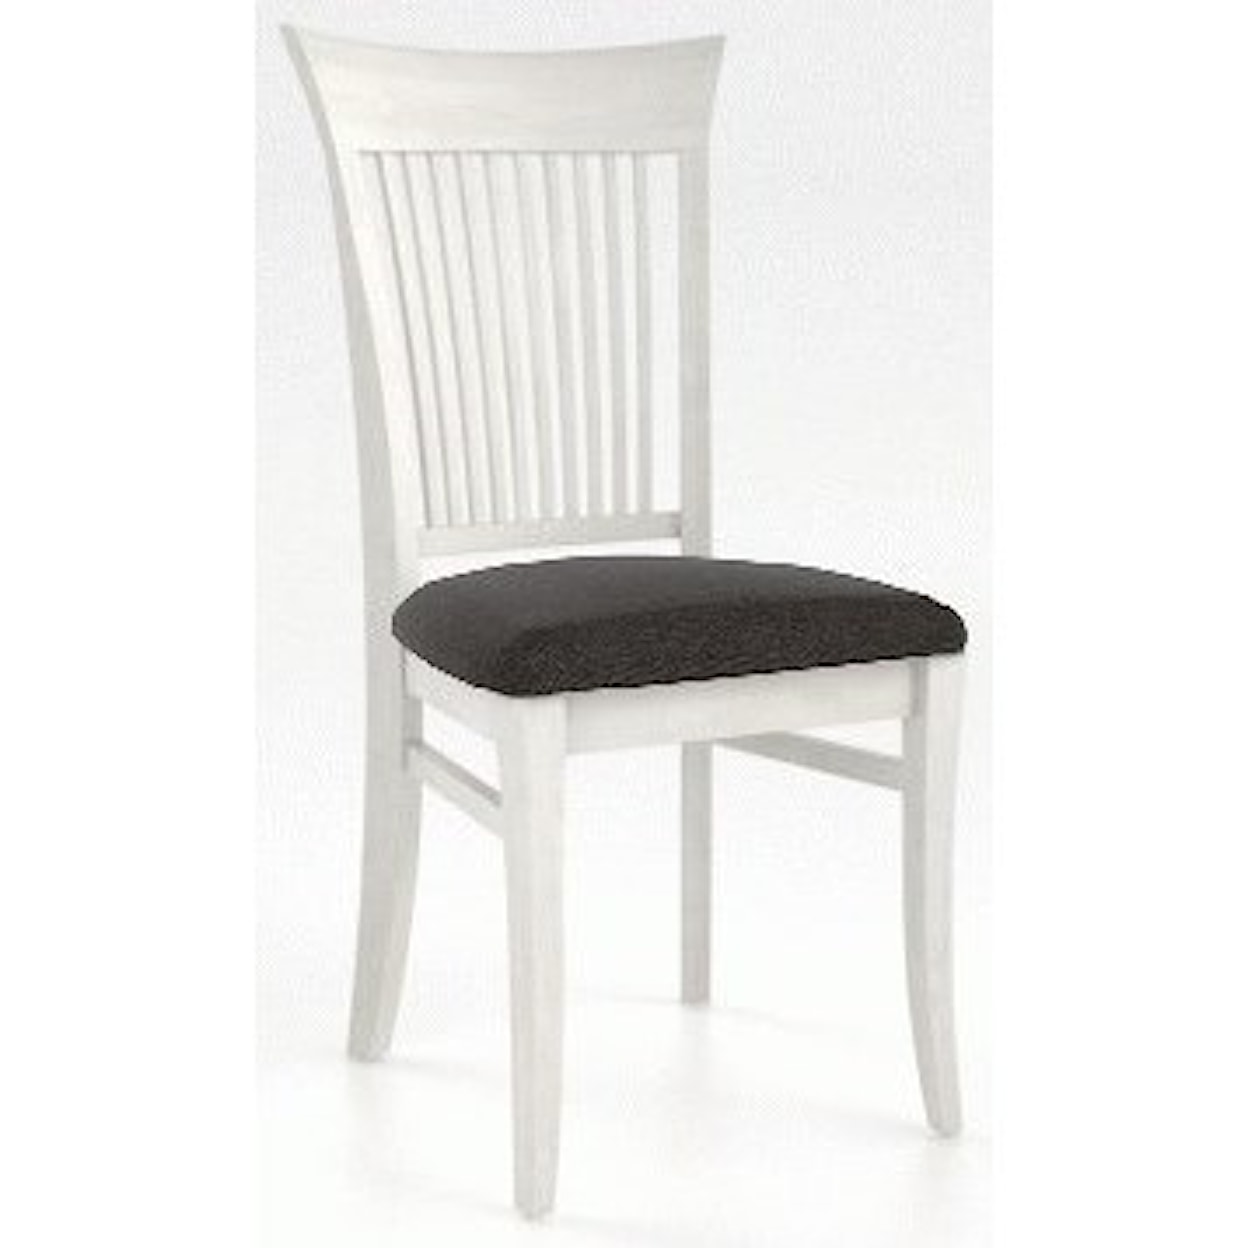 Canadel Canadel Customizable Upholstered Dining Side Chair